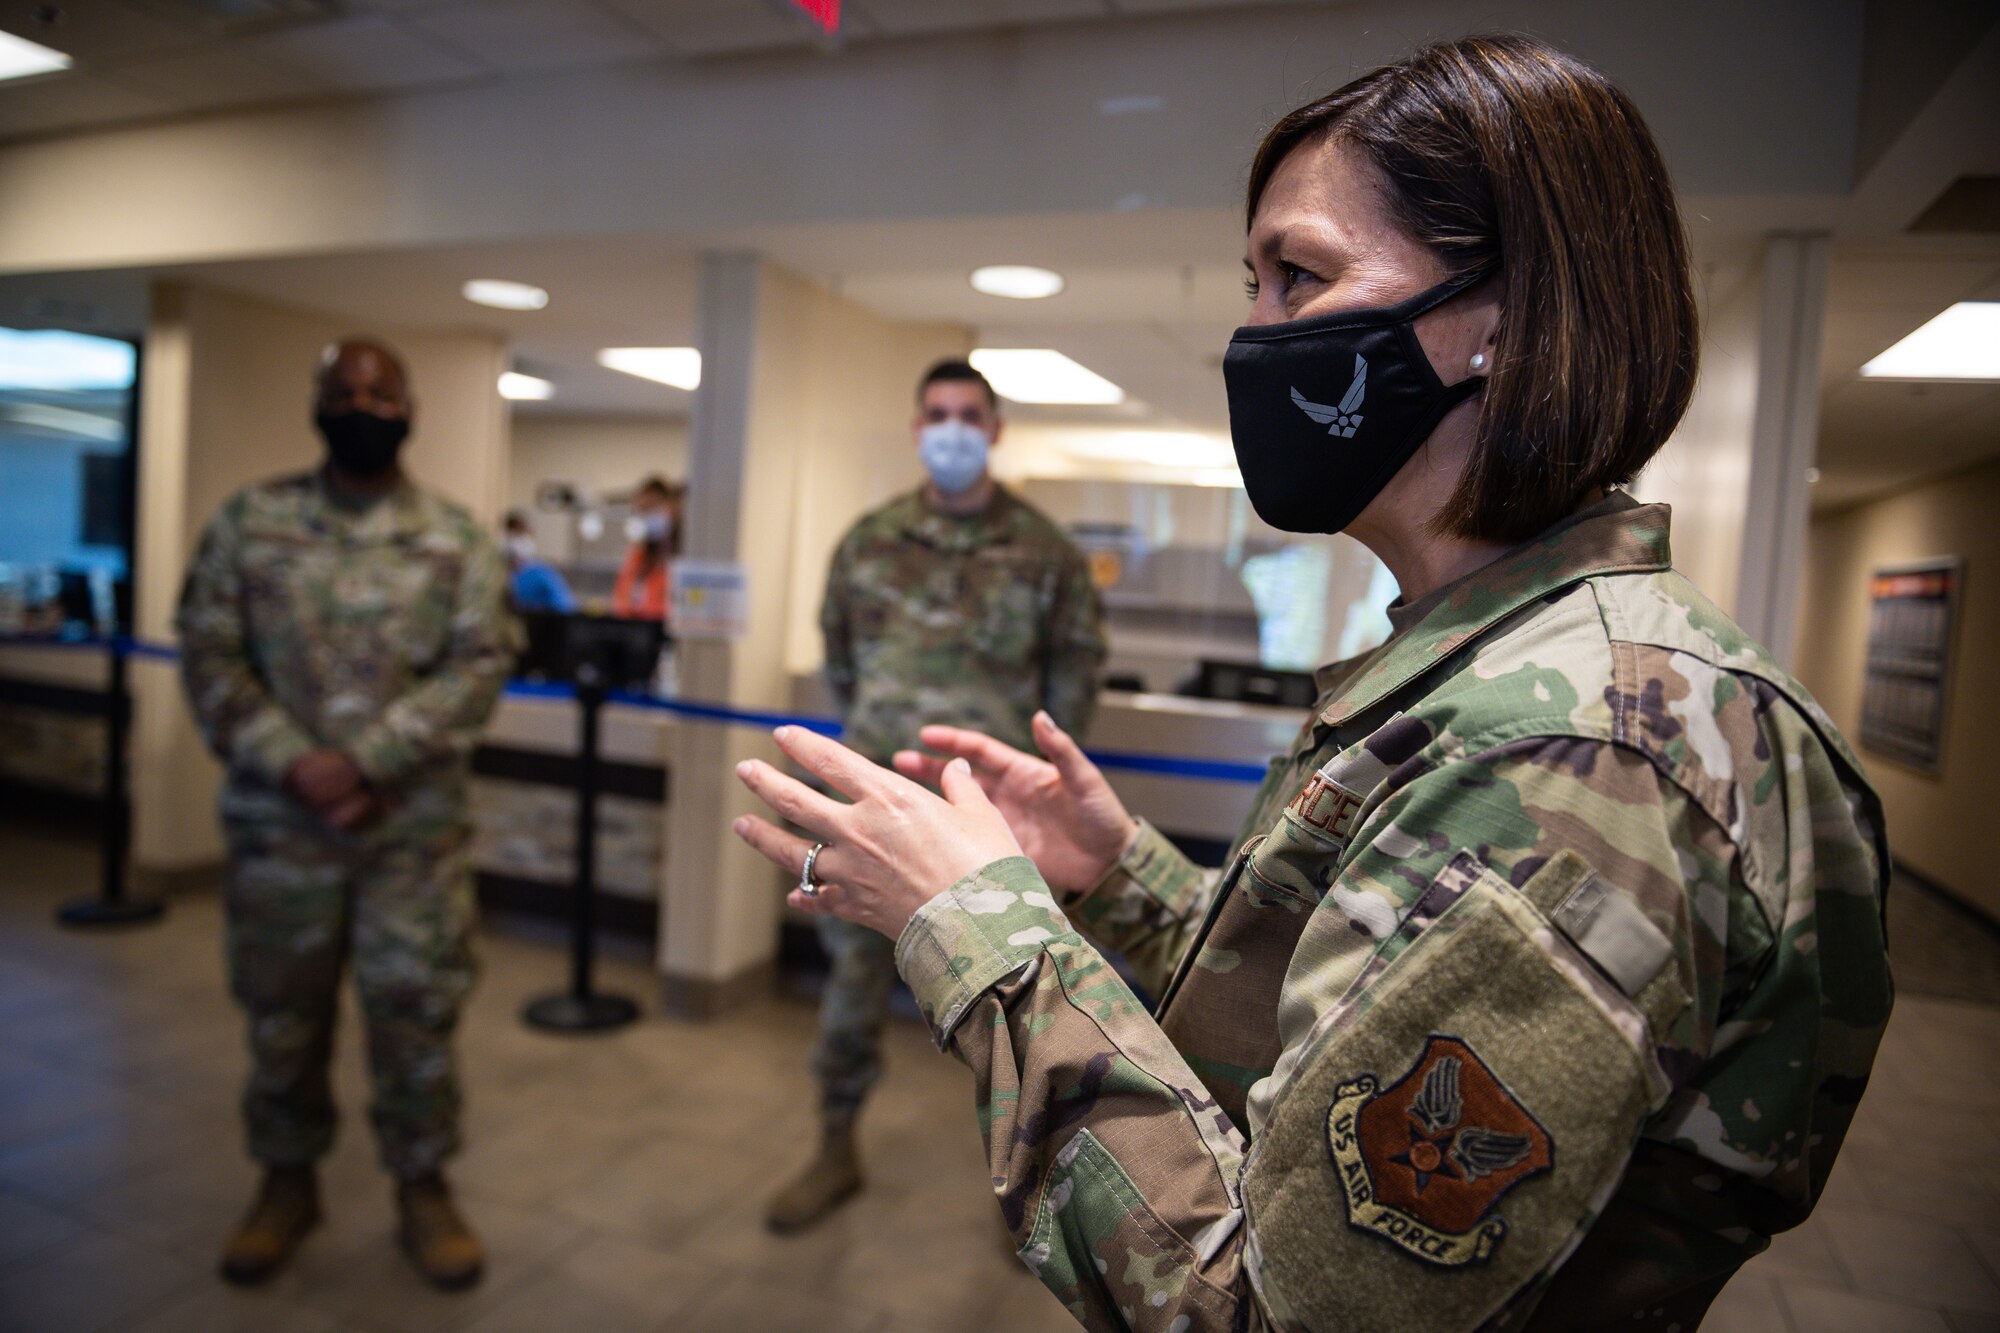 Chief Master Sergeant of the Air Force JoAnne S. Bass, addresses 2nd Dental Squadron Airmen during a tour of Barksdale Air Force Base, Louisiana, April 21, 2021.